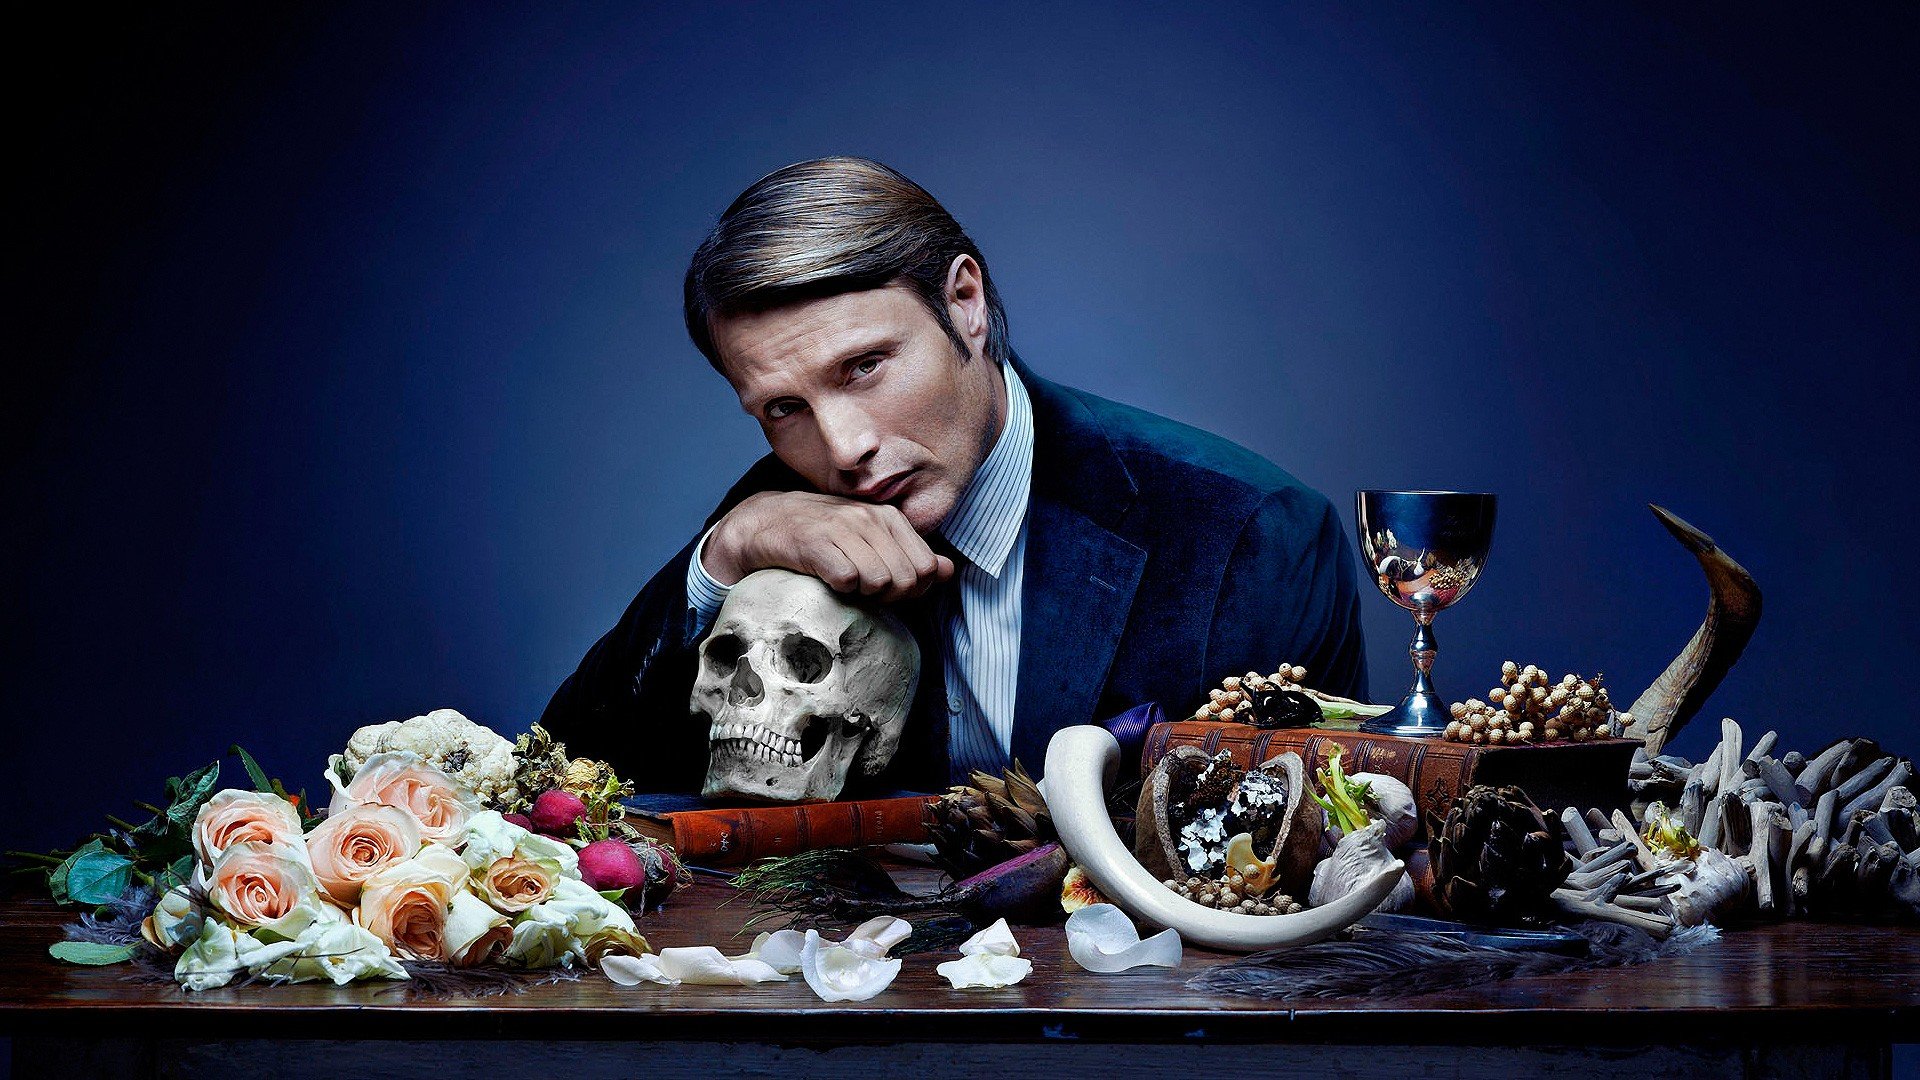 Download hd 1920x1080 Hannibal desktop background ID:8806 for free